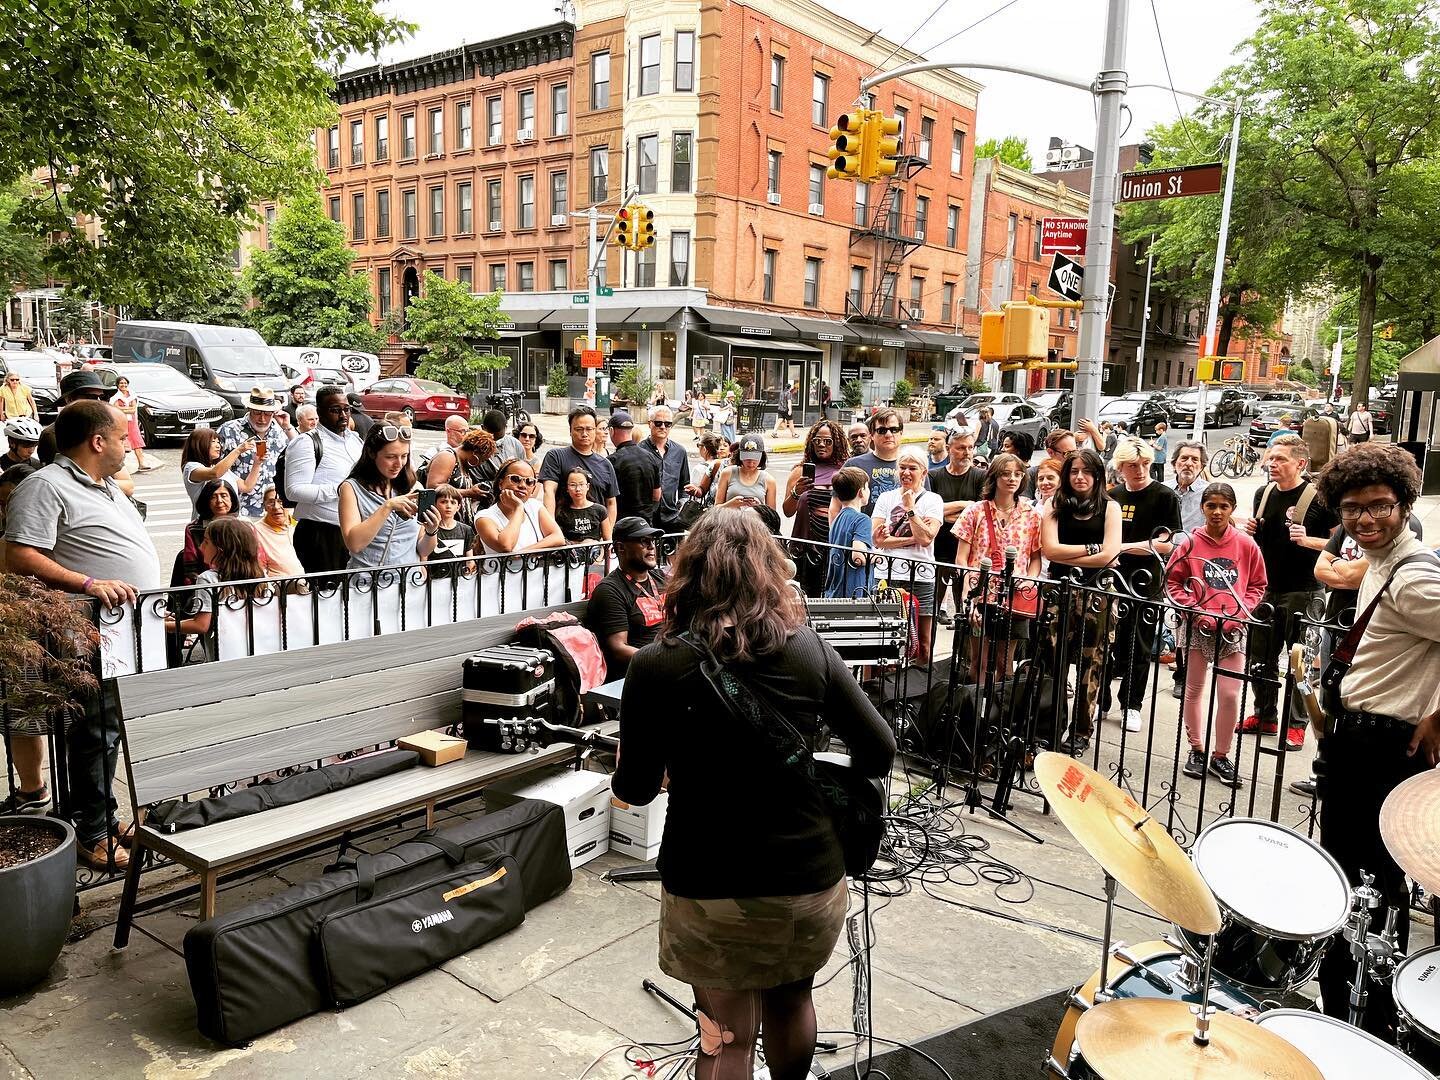 Incredible day! Thank you @brooklynconservatory for filling the streets with music and for including @kidsrockforkids. We ❤️ being part of this great event! 

Thanks to the two teen bands that blew us all away: Back Pocket @back.pocket.nyc 
The House